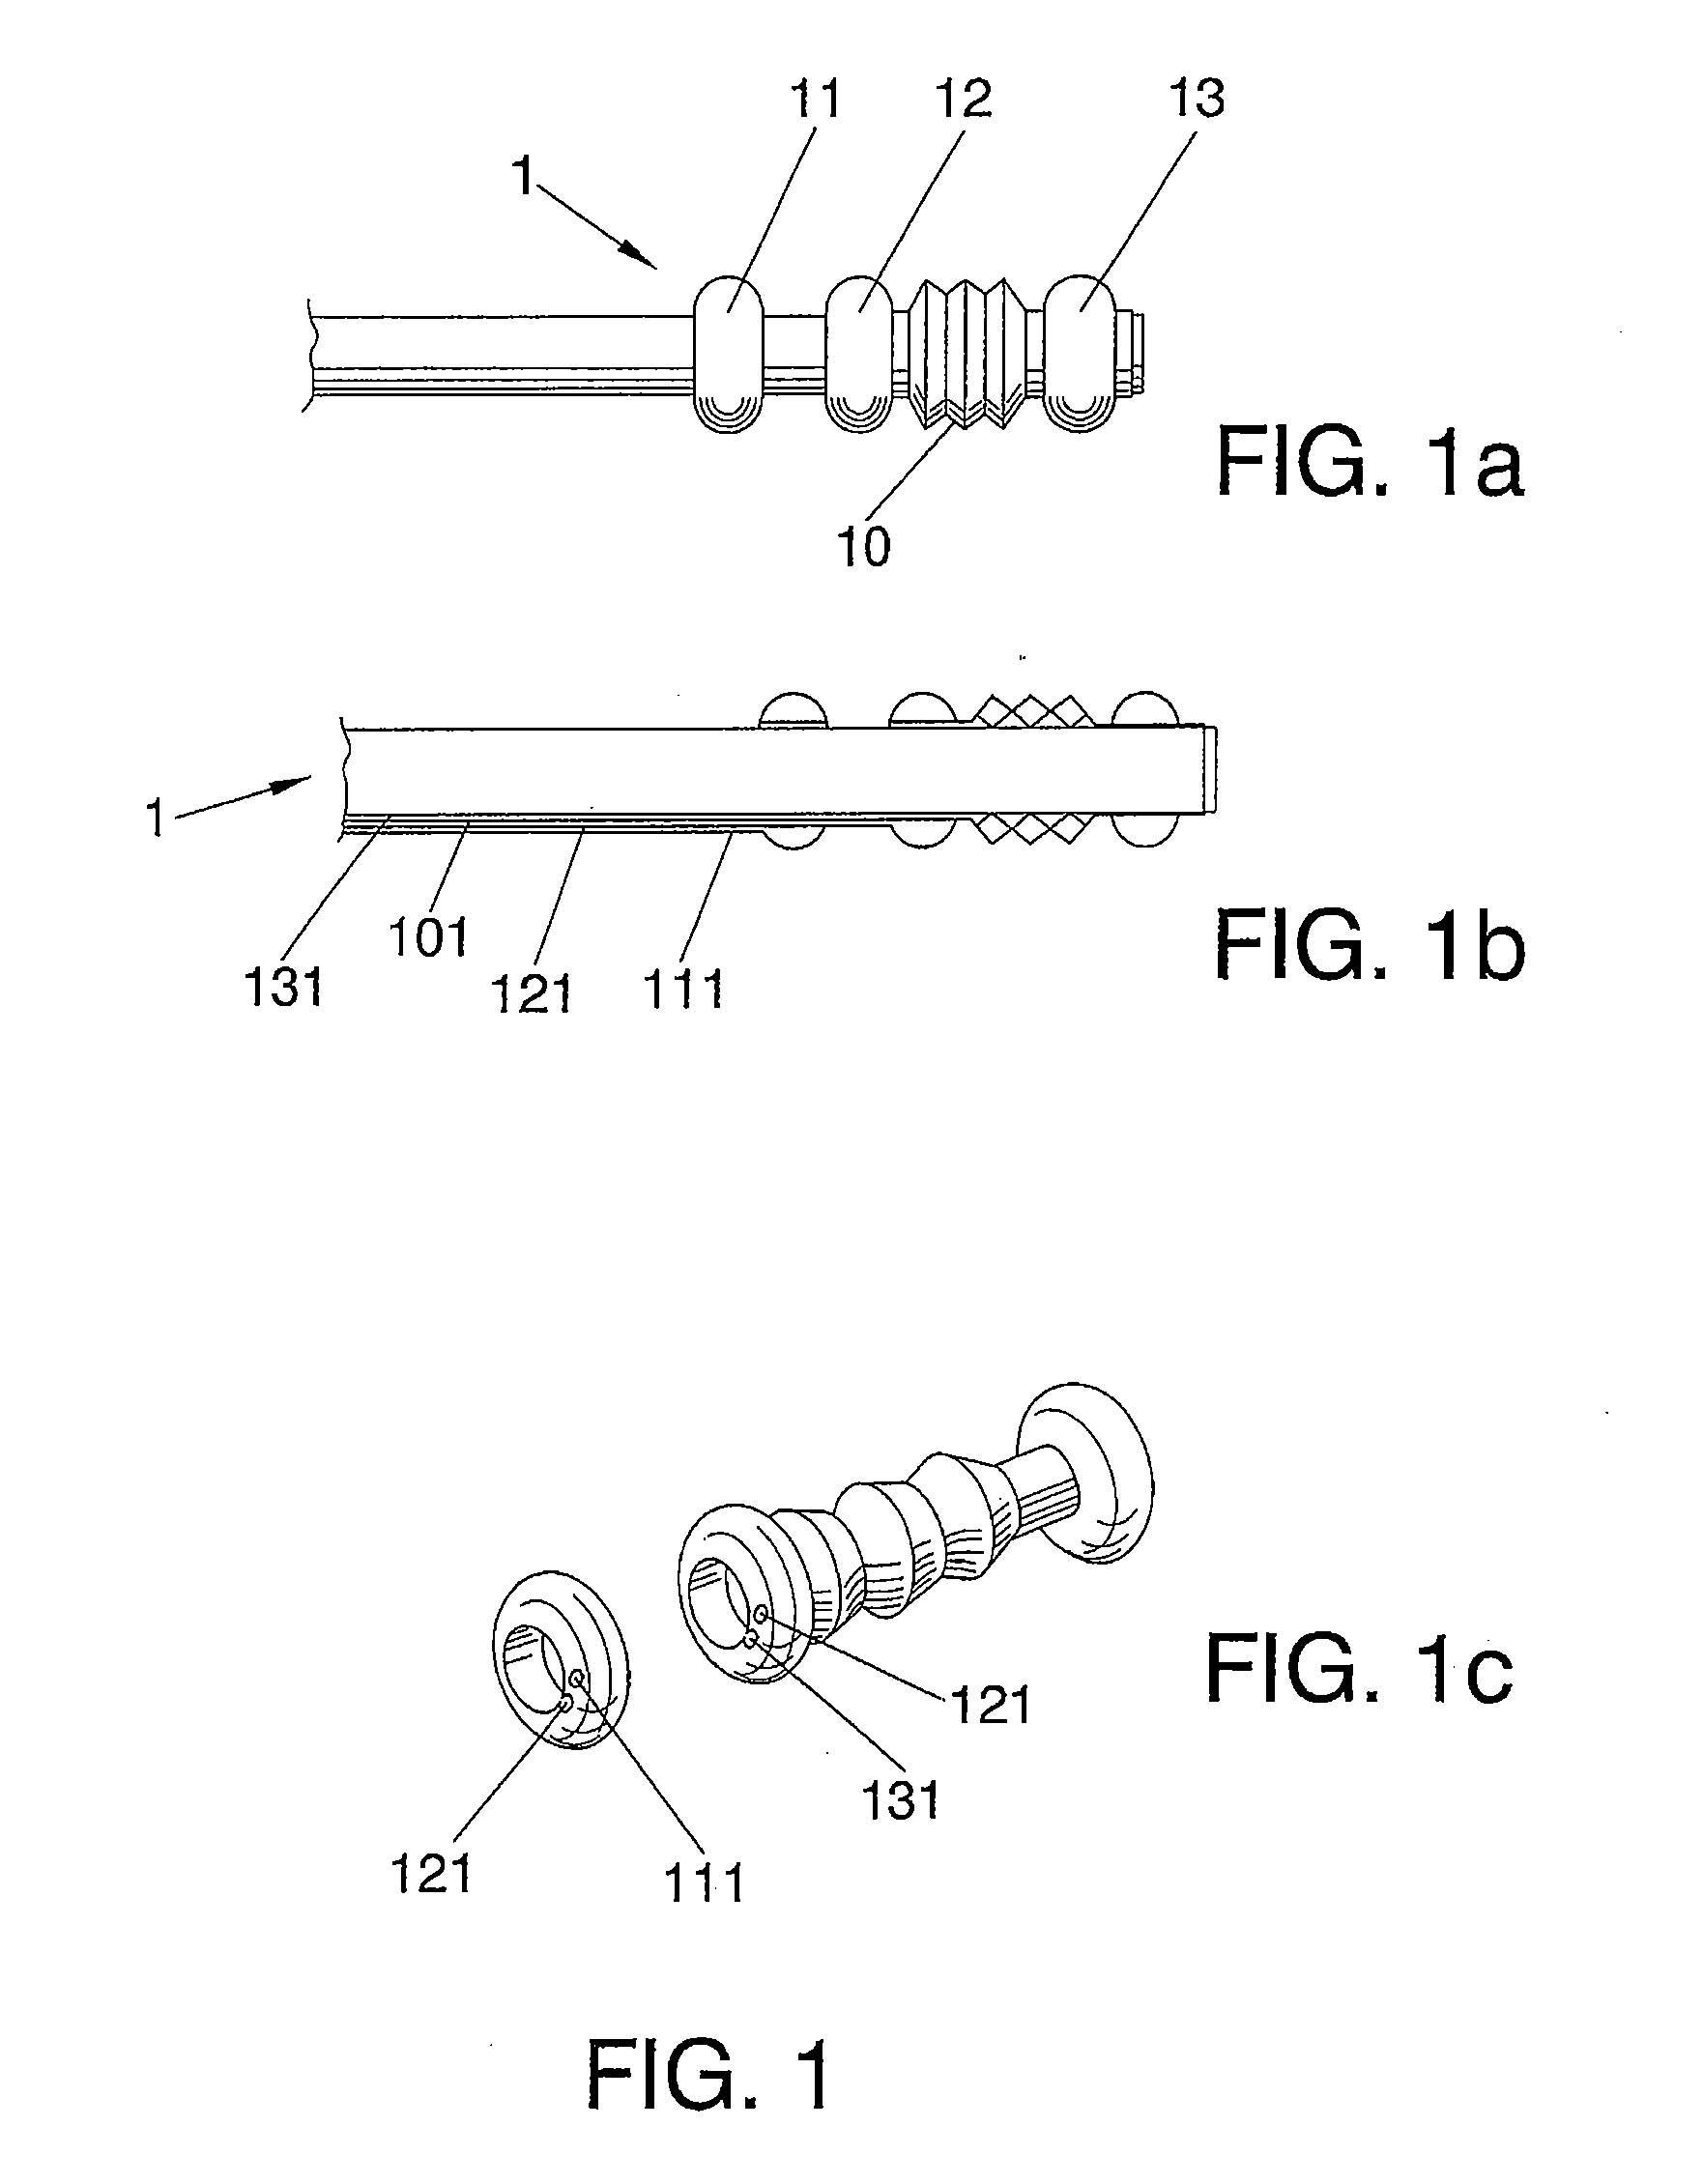 Method and device for automated translational movement of an endoscope through the digestive tract